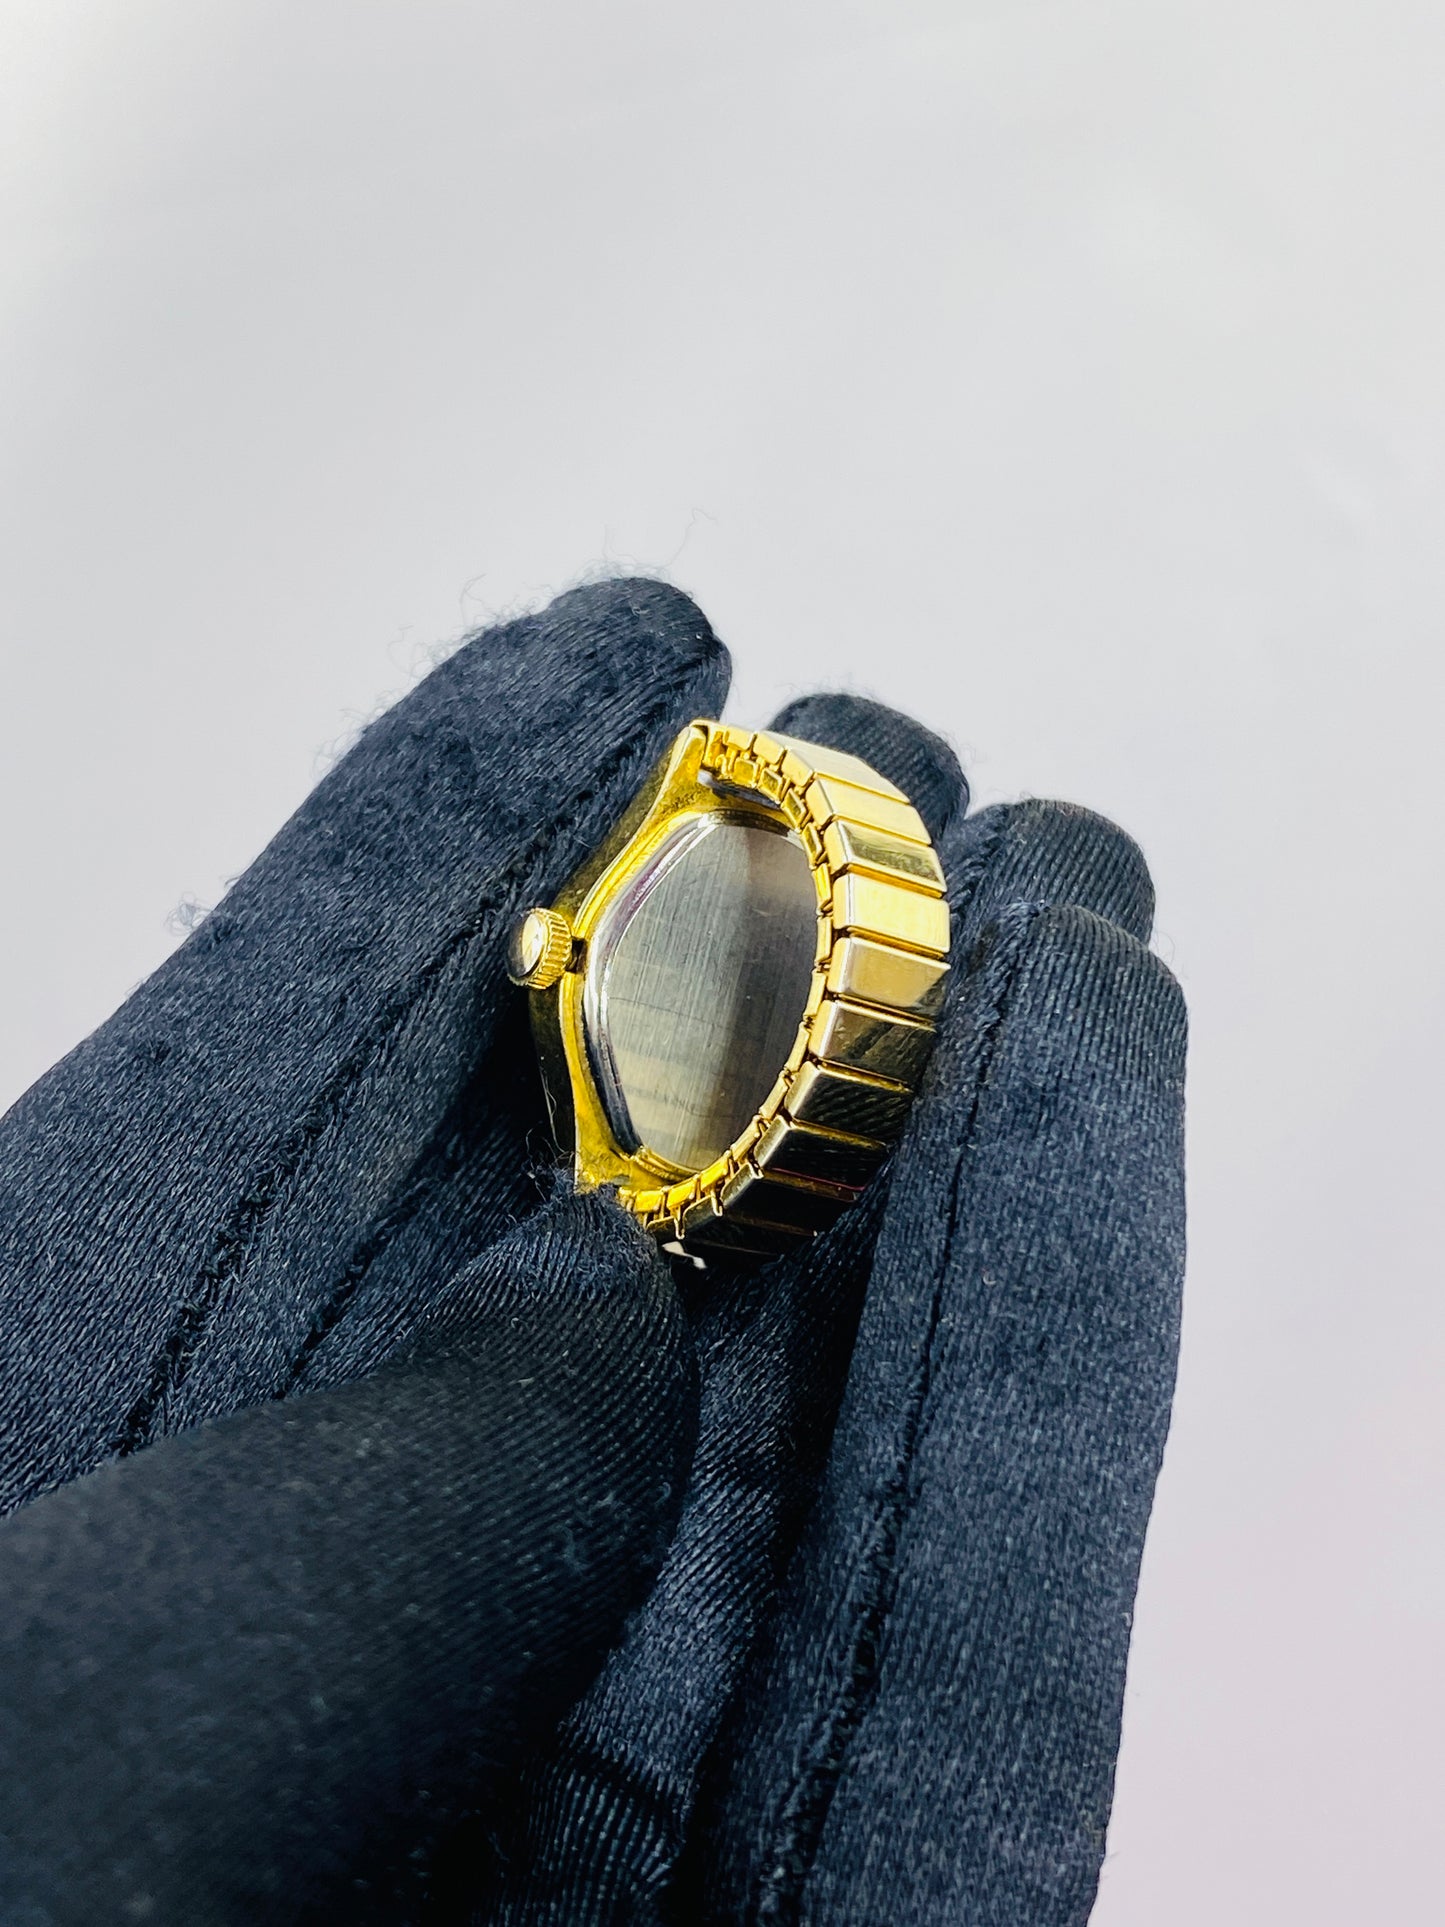 Vintage Gold Tone Wind Up Analogue Ring Watch 